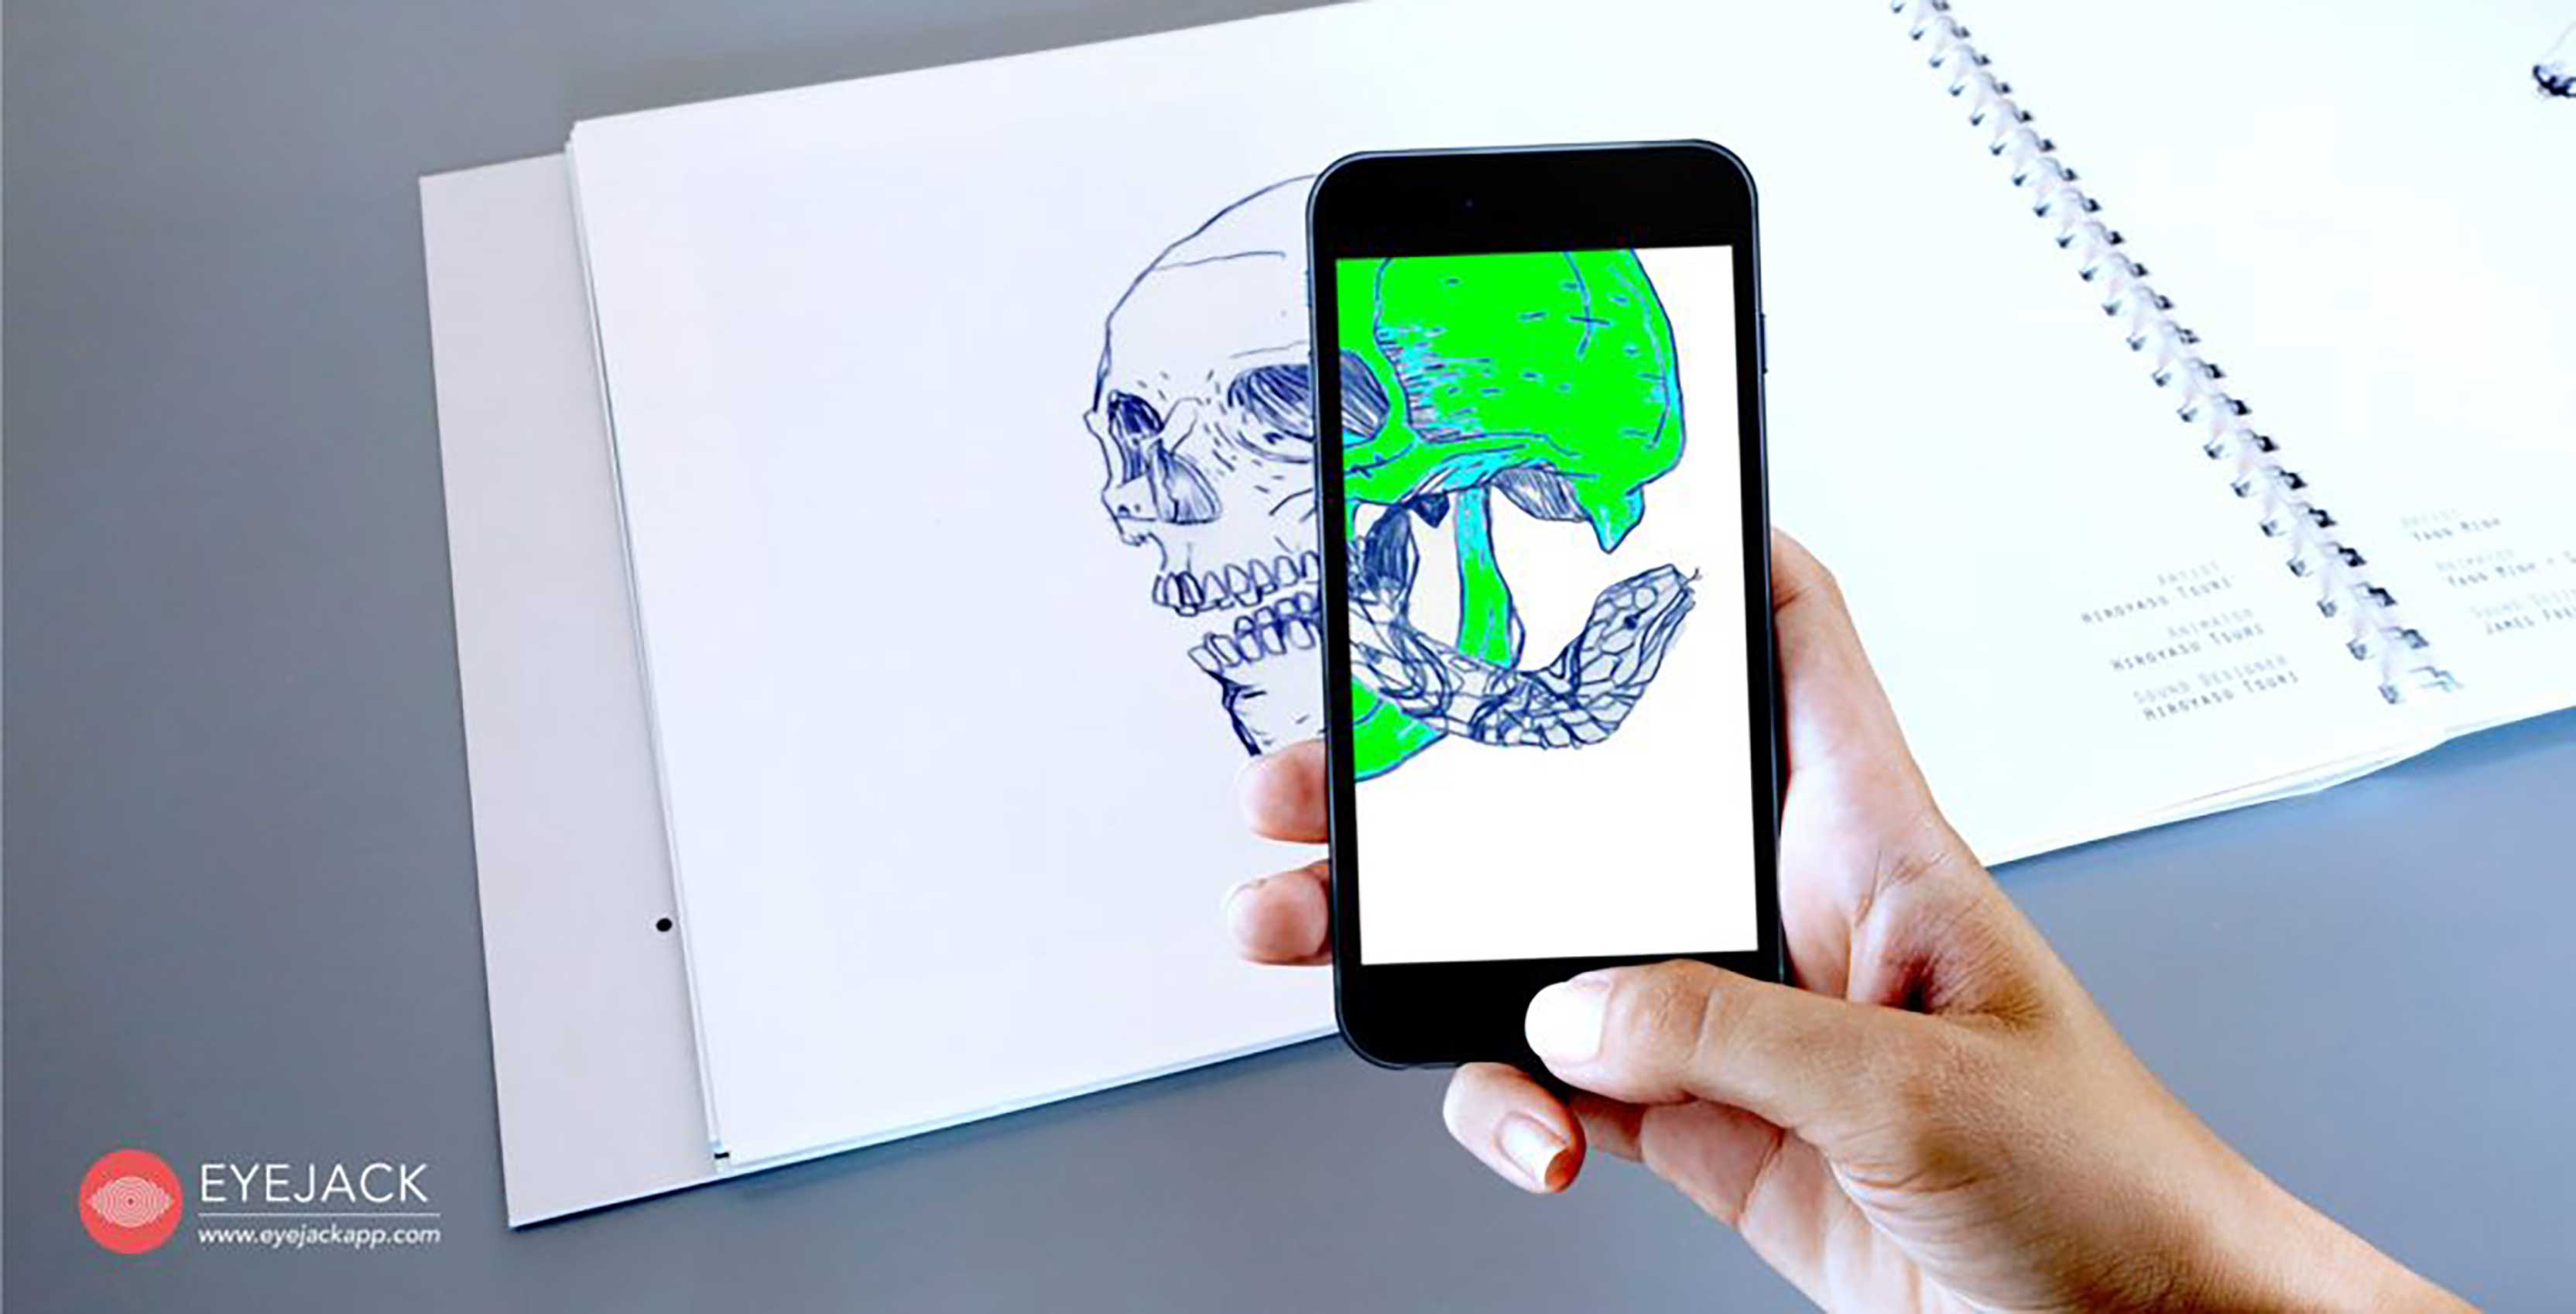 augmented reality artwork on phone